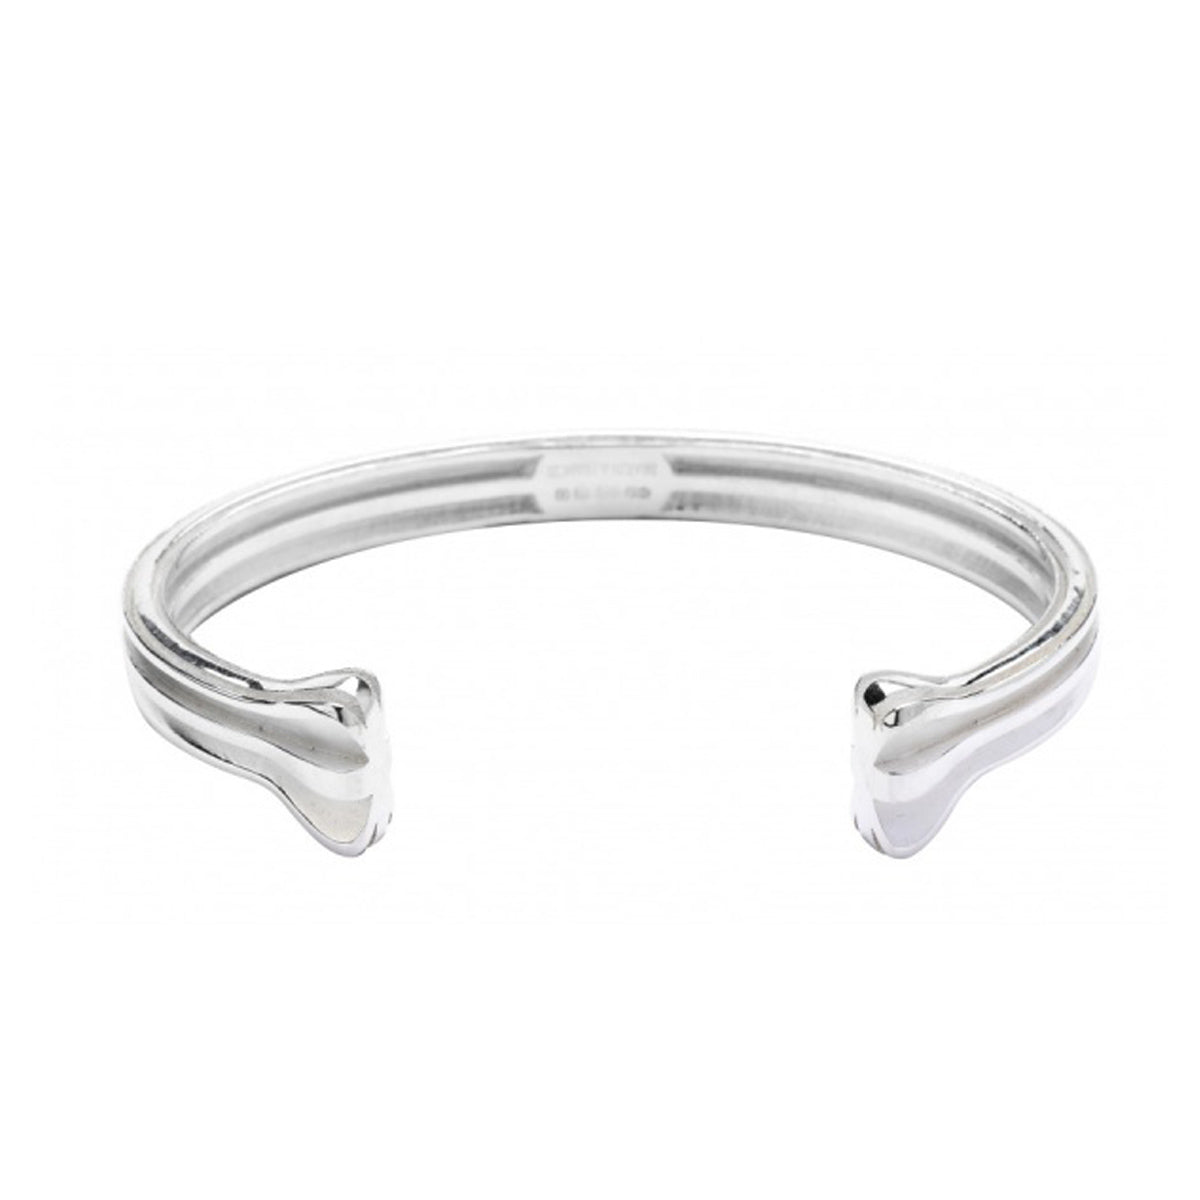 A Bangle in Sterling Silver with a Union Jack Design